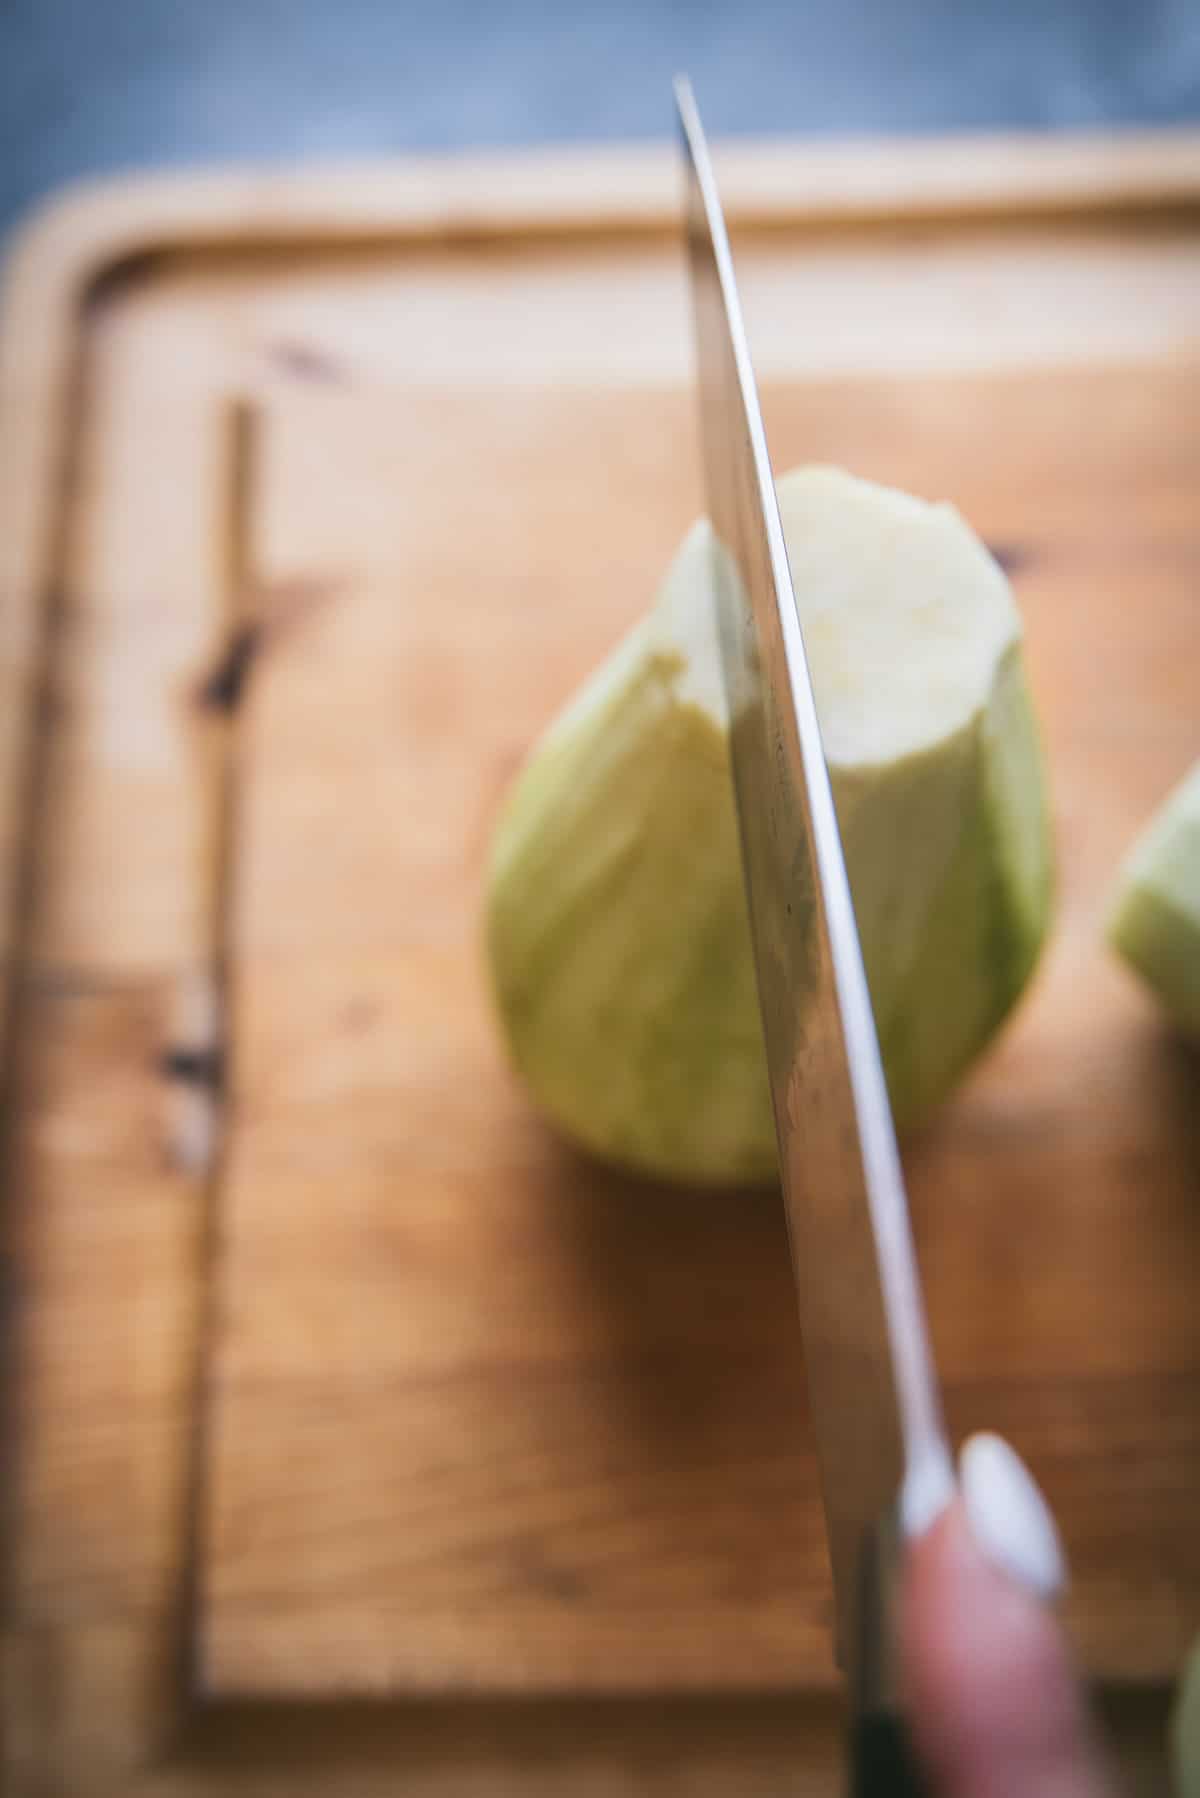 A hand holding a knife is preparing to chop through a peeled eggplant on top of a wooden chopping board.